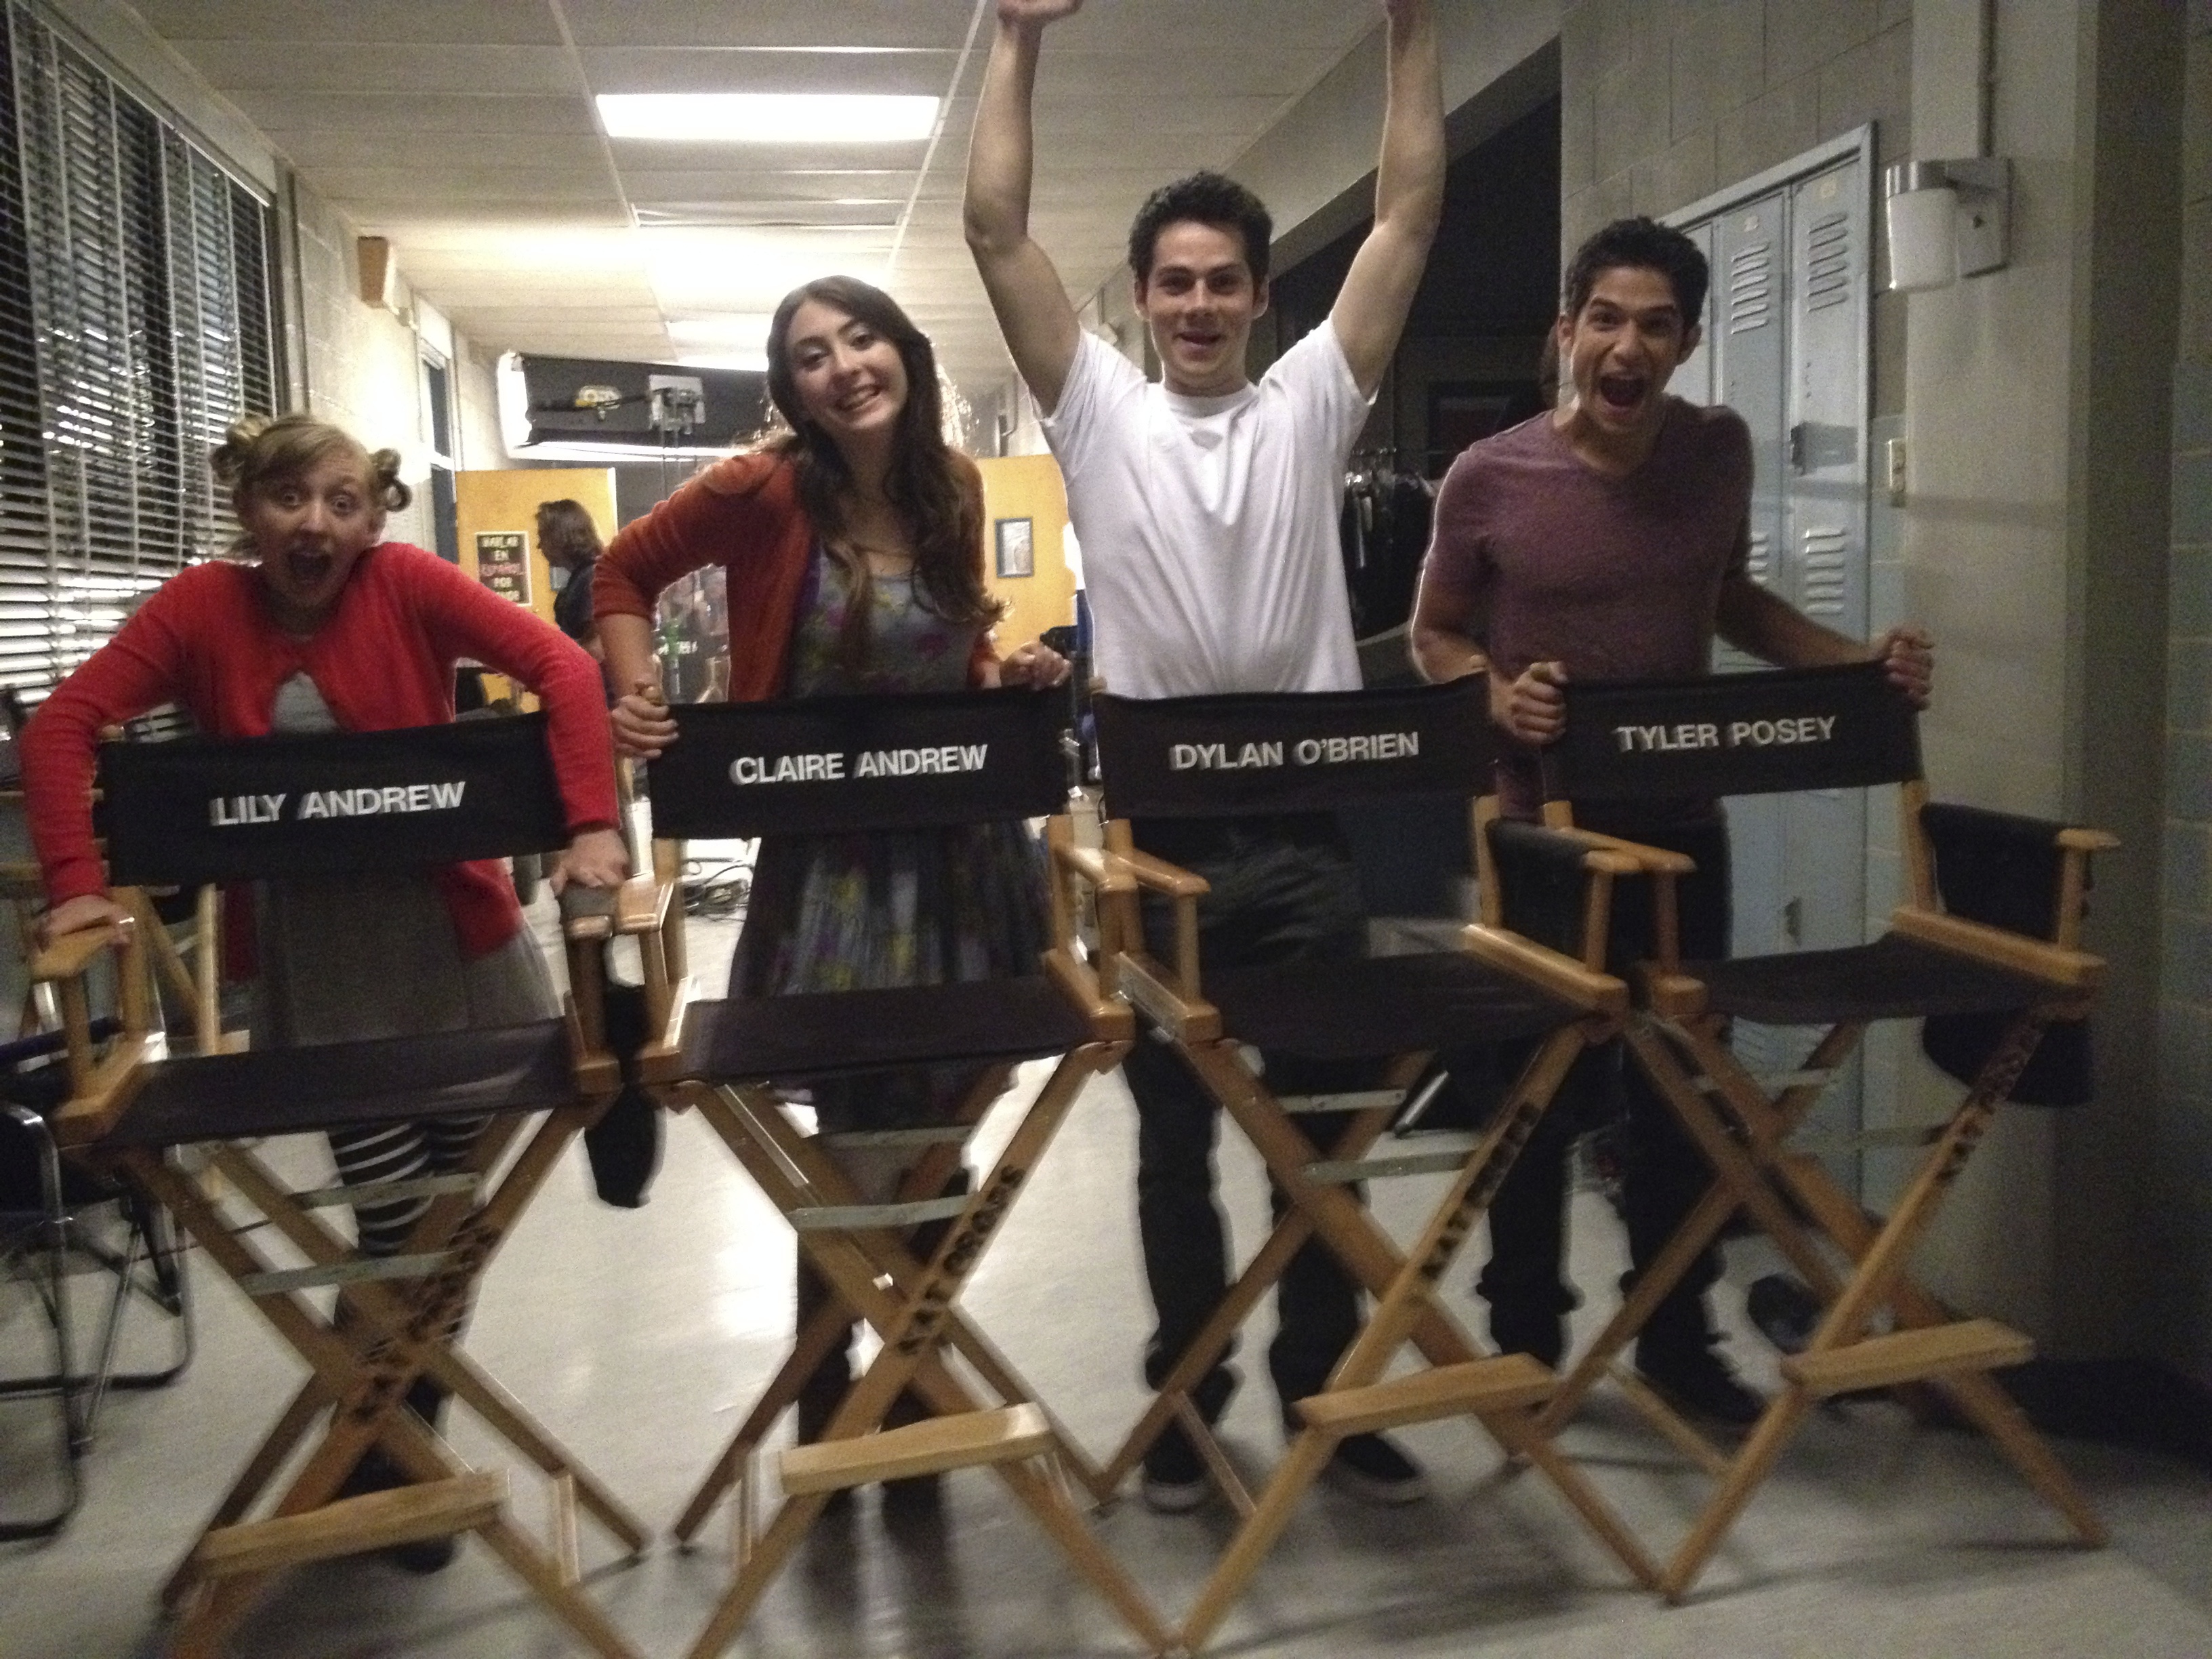 On the set of MTV's Teen Wolf. Lily Bleu Andrew, Claire Bryétt Andrew, Dylan O'Brien, Tyler Posey